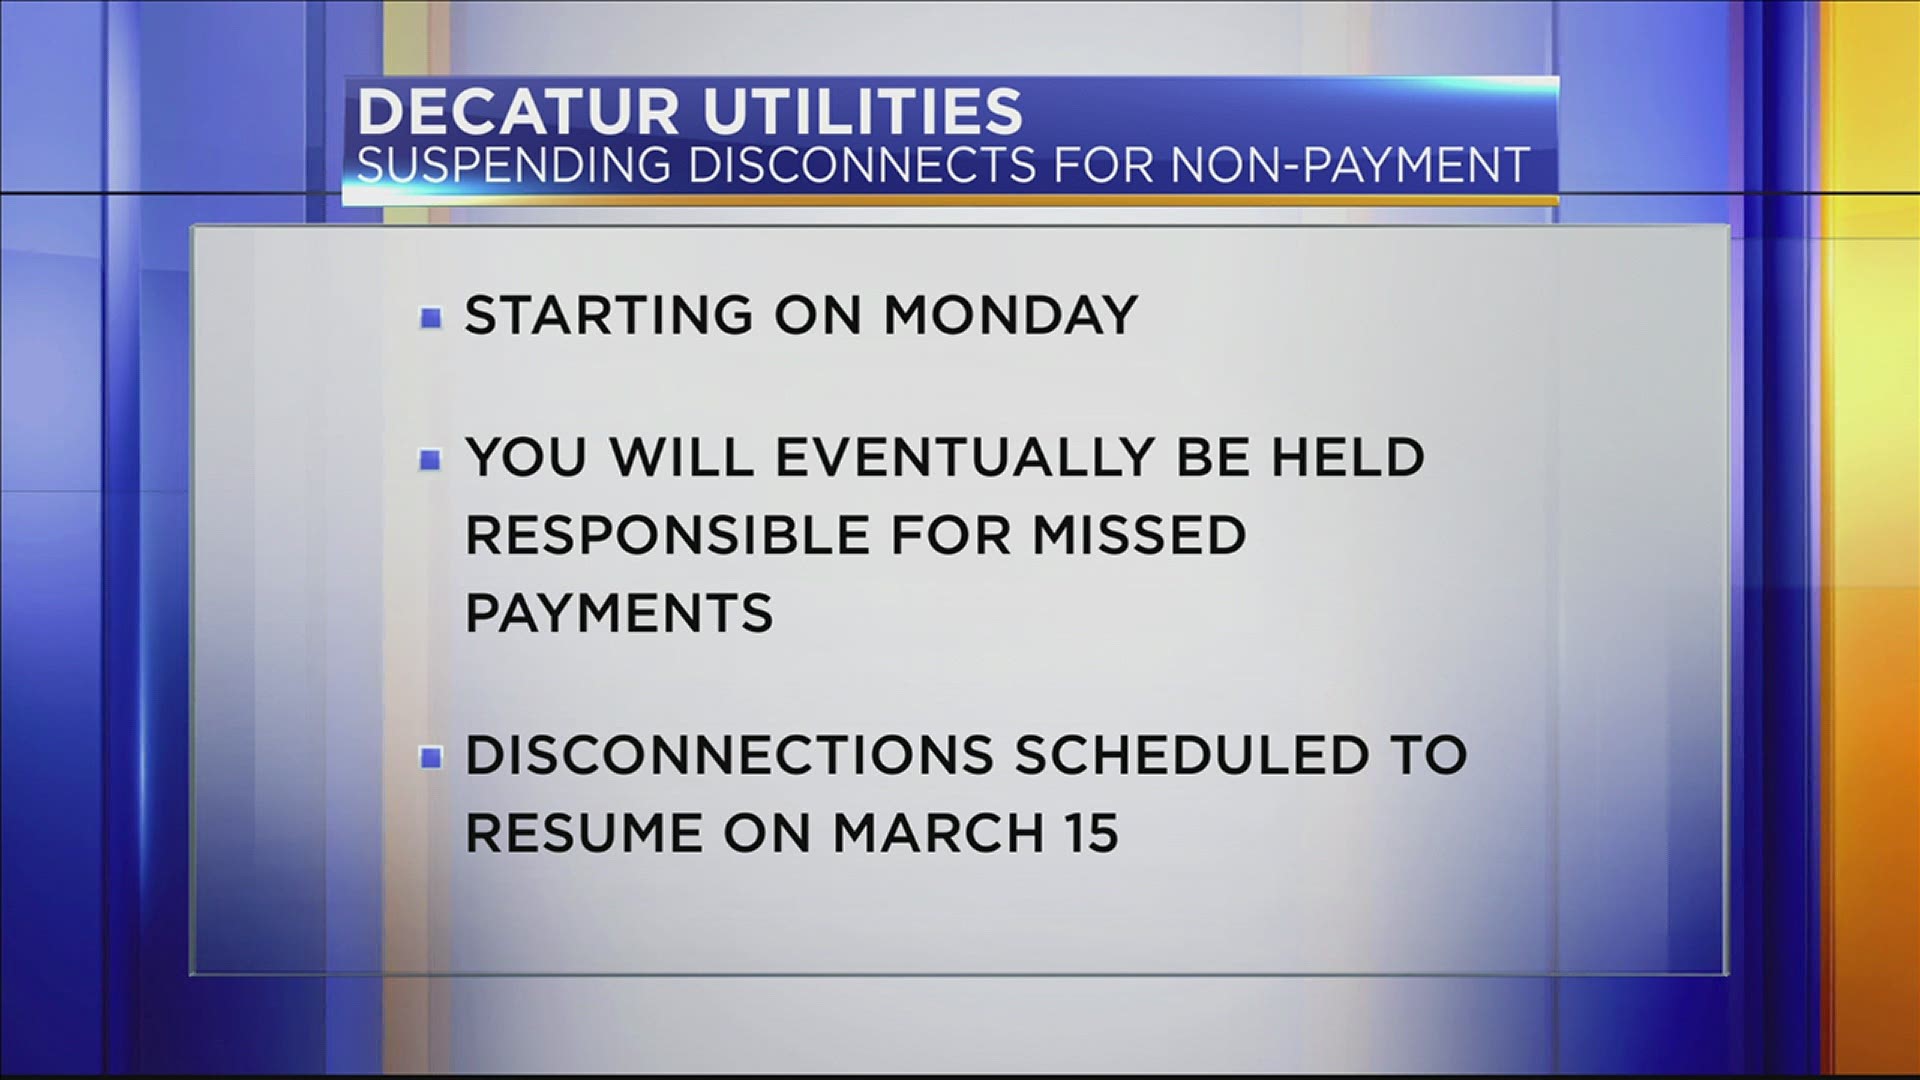 The suspension will last approximately two months, but customers will still be responsible for their bills.